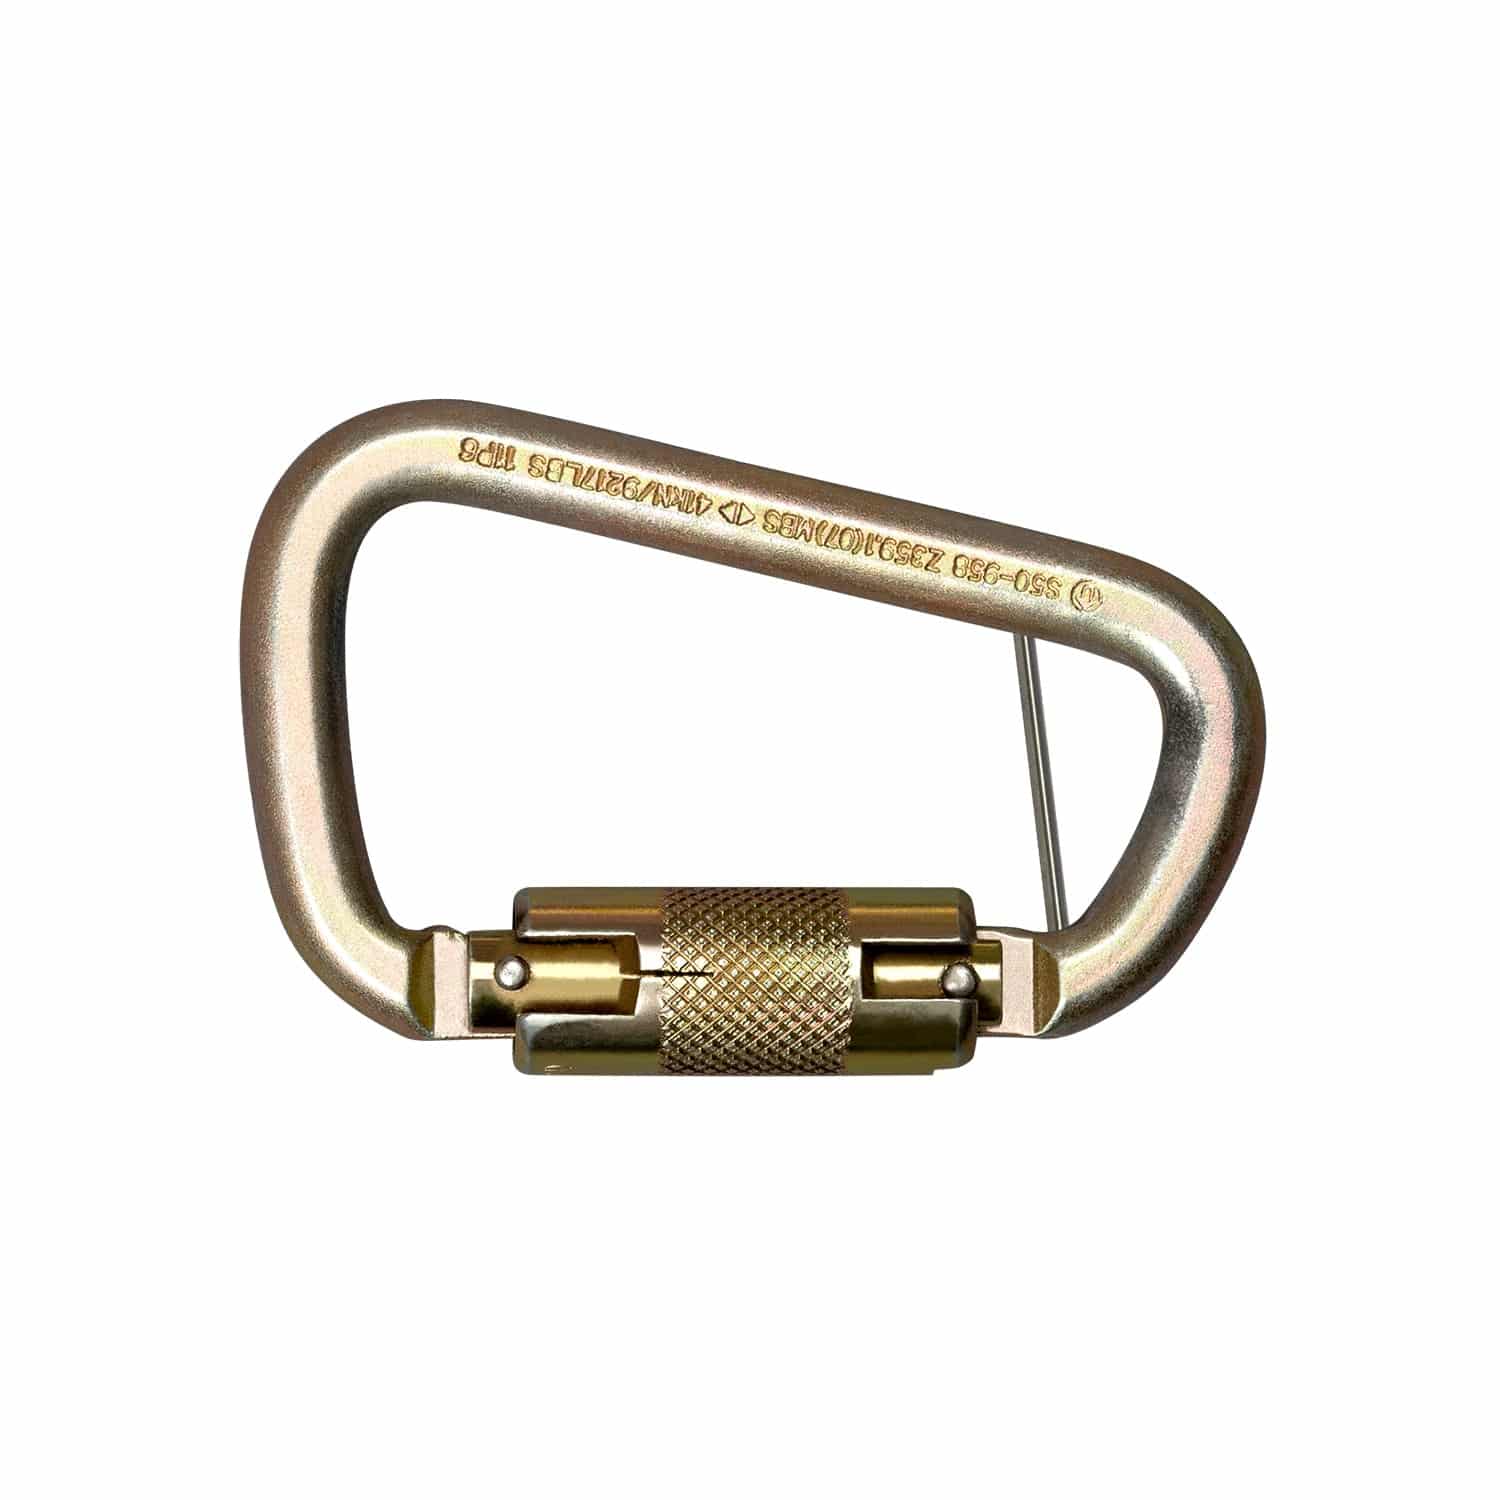 Manufacturing 5005T Lock - Holes Buckingham Captive Steel Pin - Carabiner Twist with